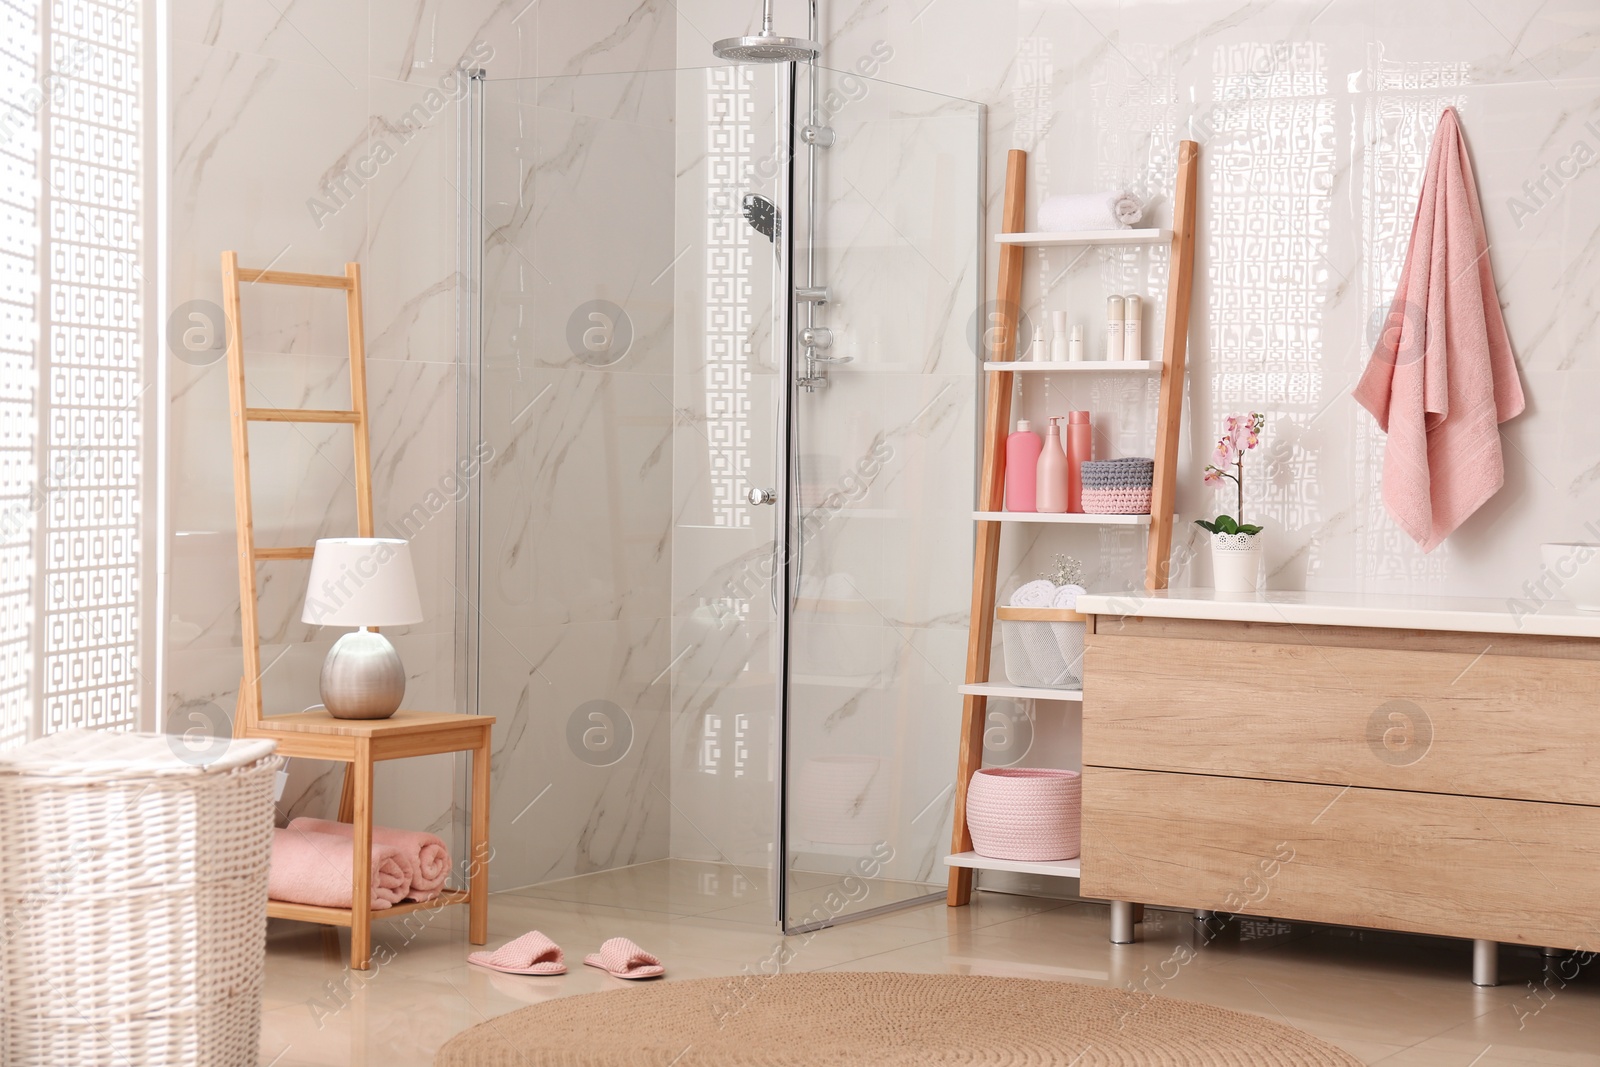 Photo of Modern bathroom interior with decorative ladder and shower stall